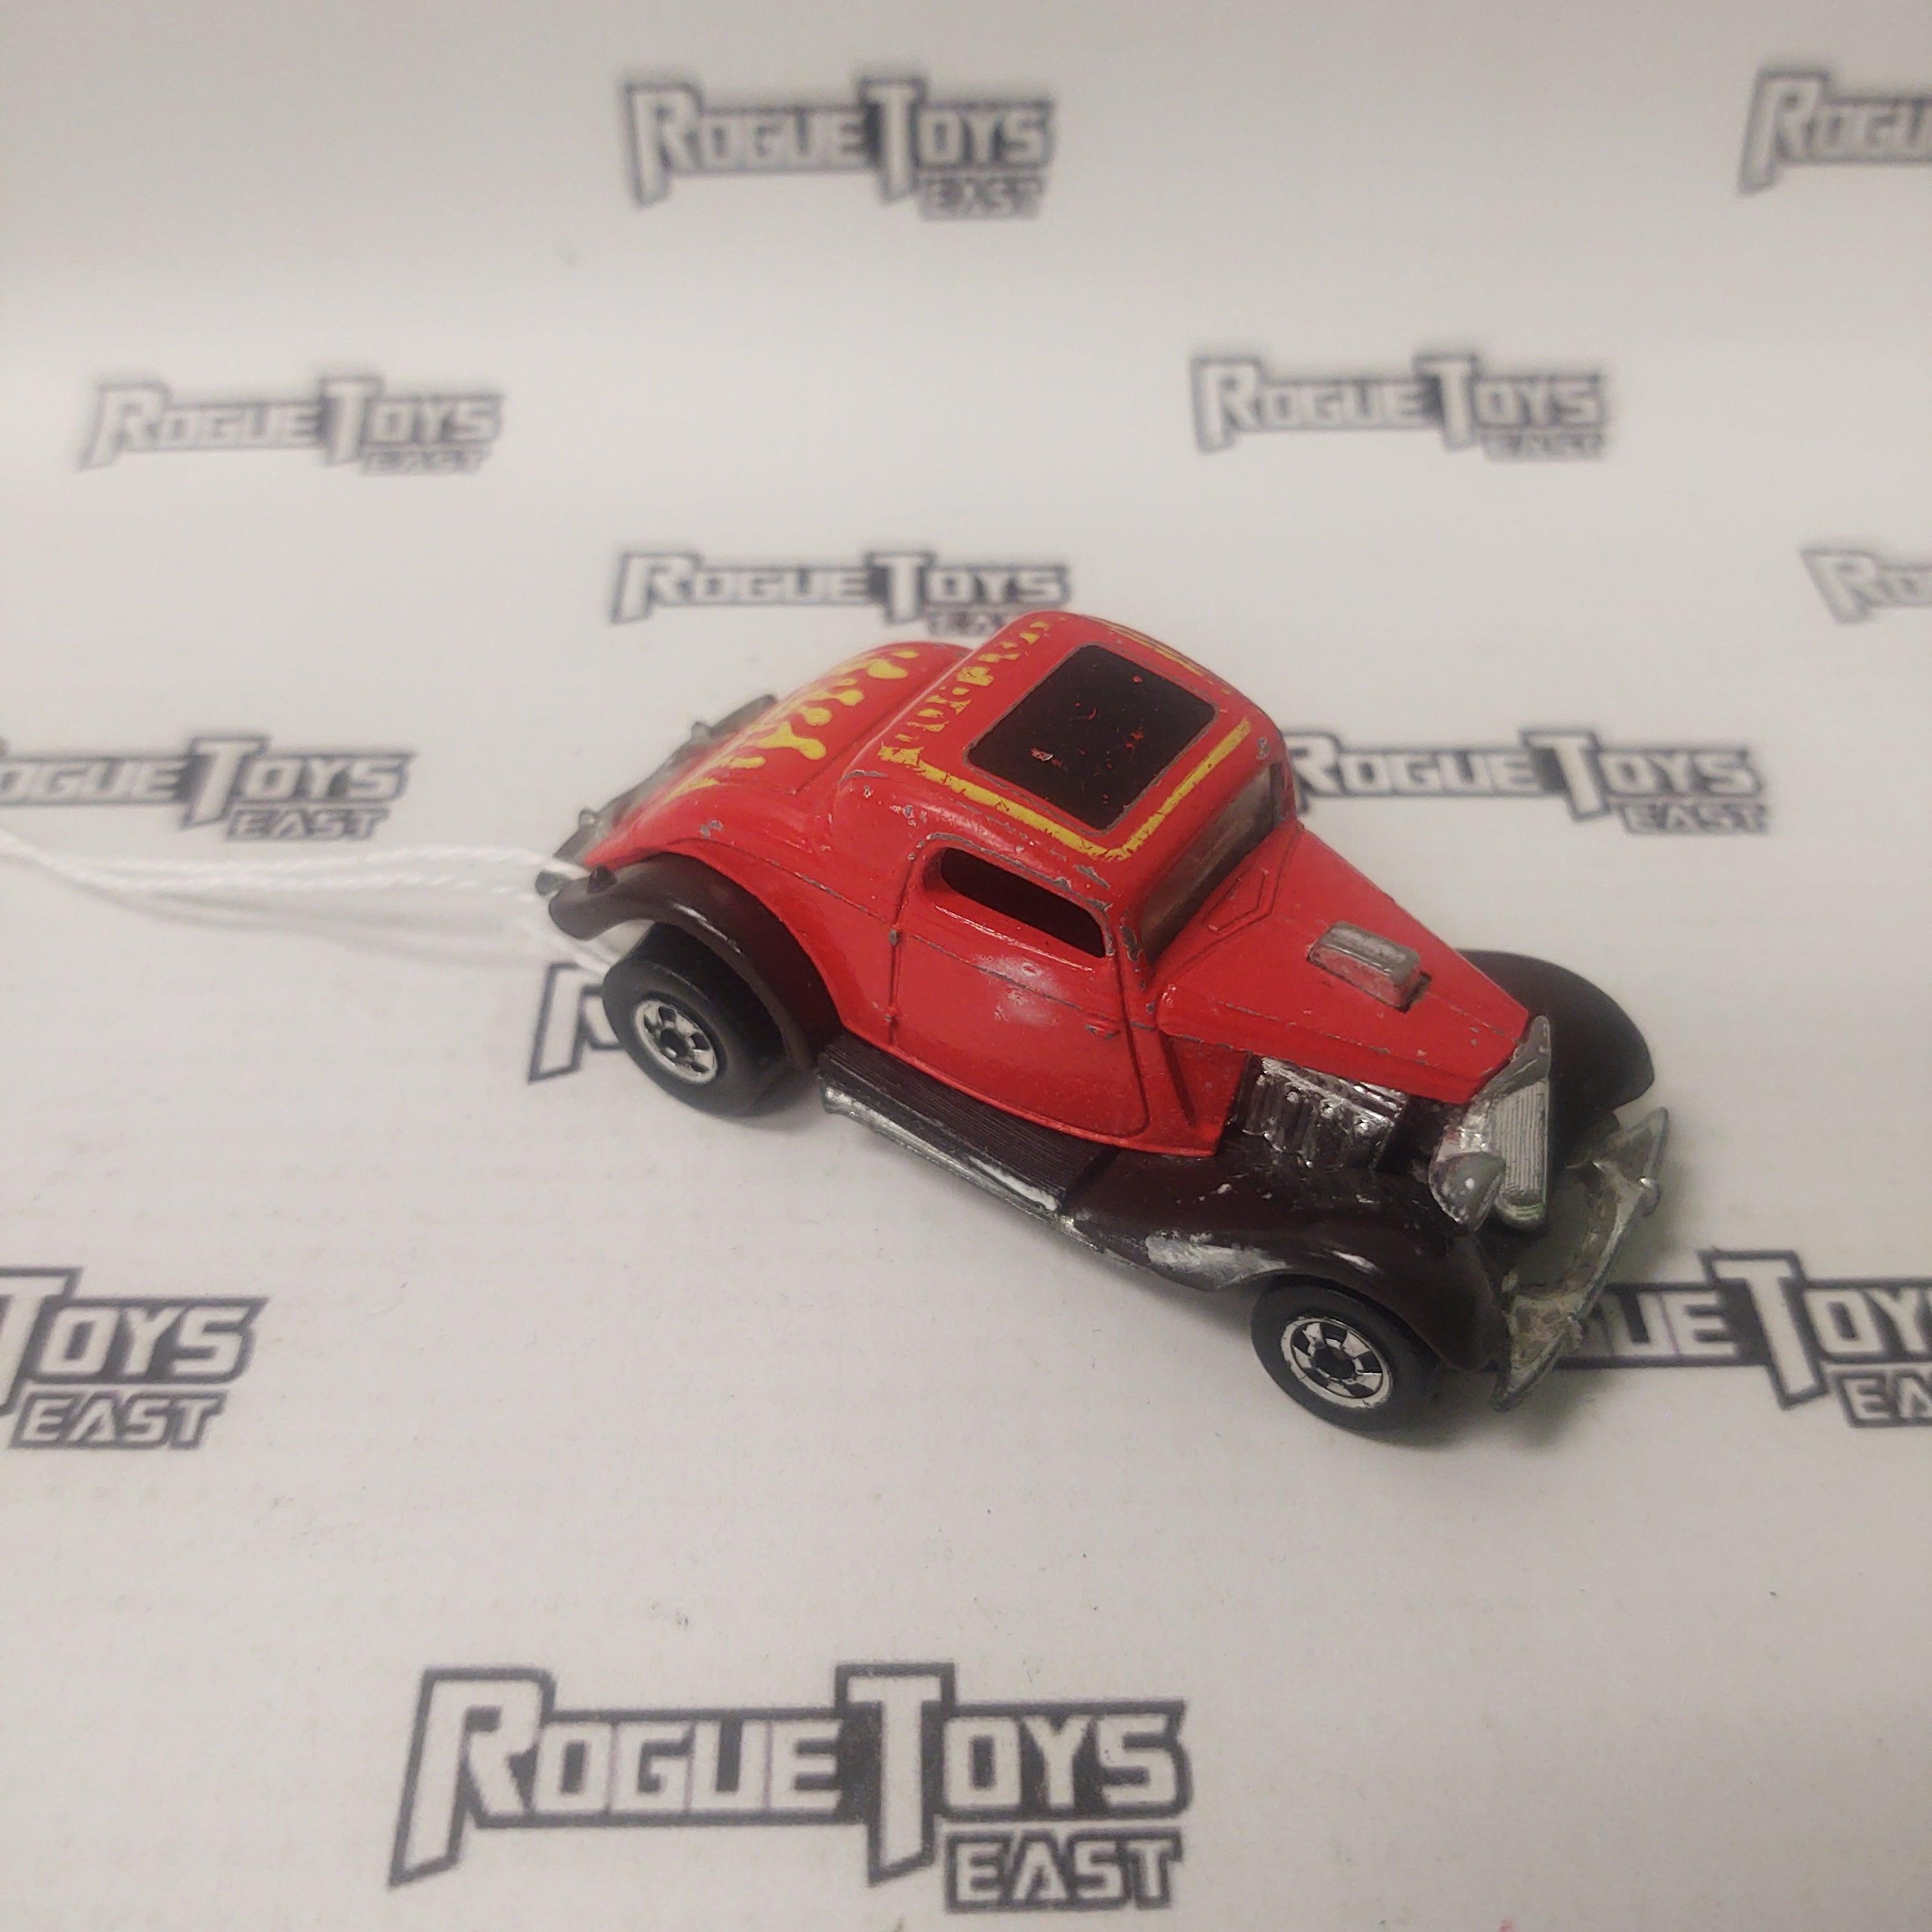 Mattel Hot Wheels 1979 Hot Rod '34 Ford Coupe - Rogue Toys